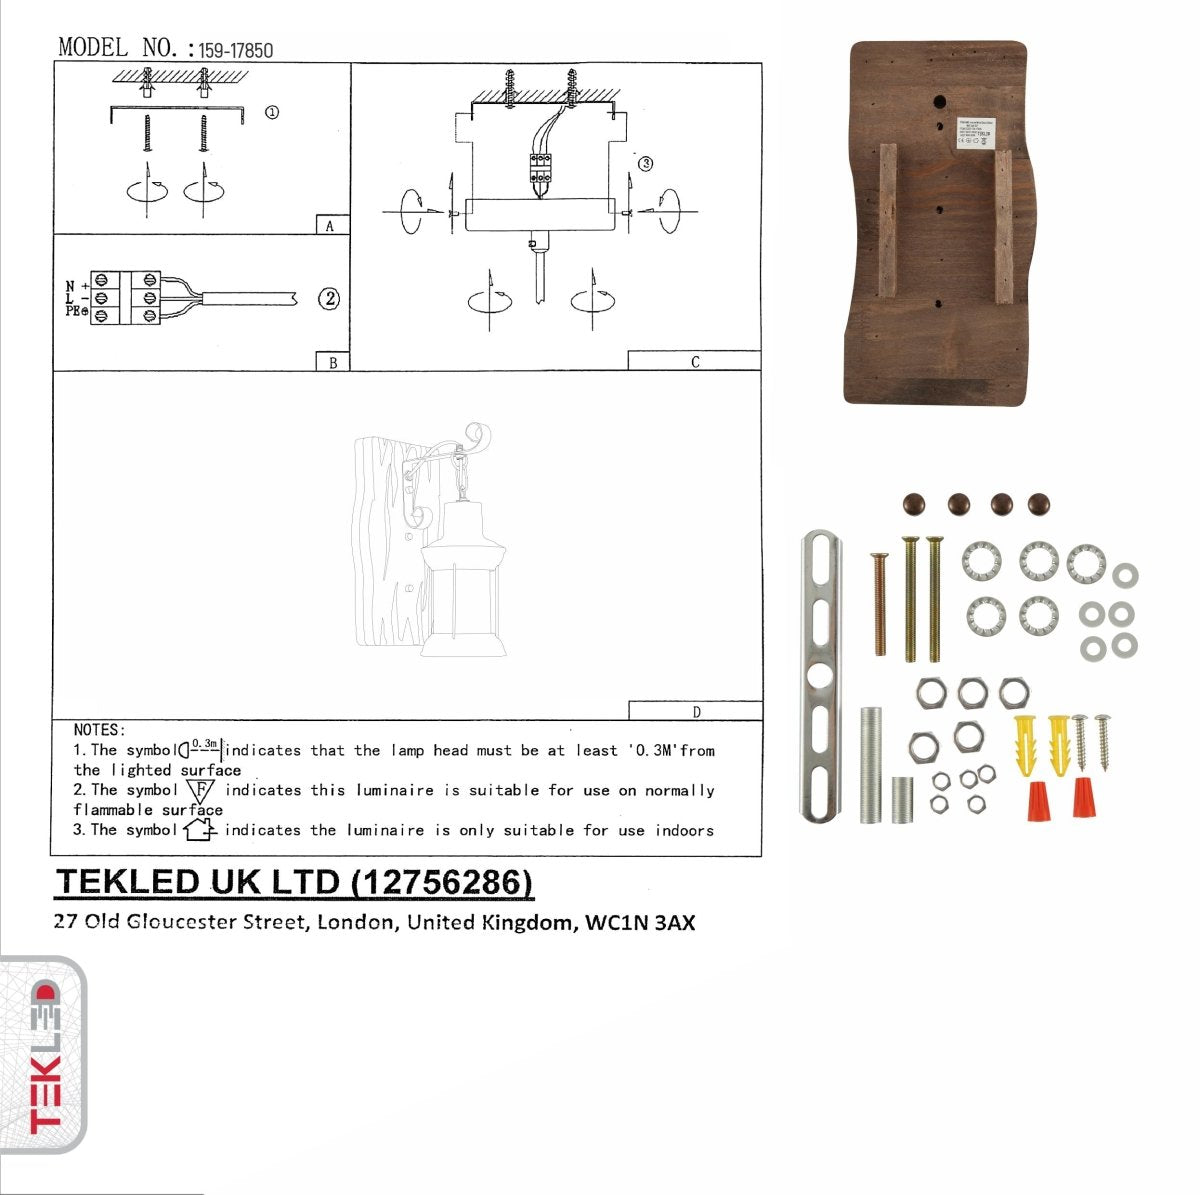 User manual for Iron and Wood Glass Cylinder Wall Light E27 | TEKLED 159-17850